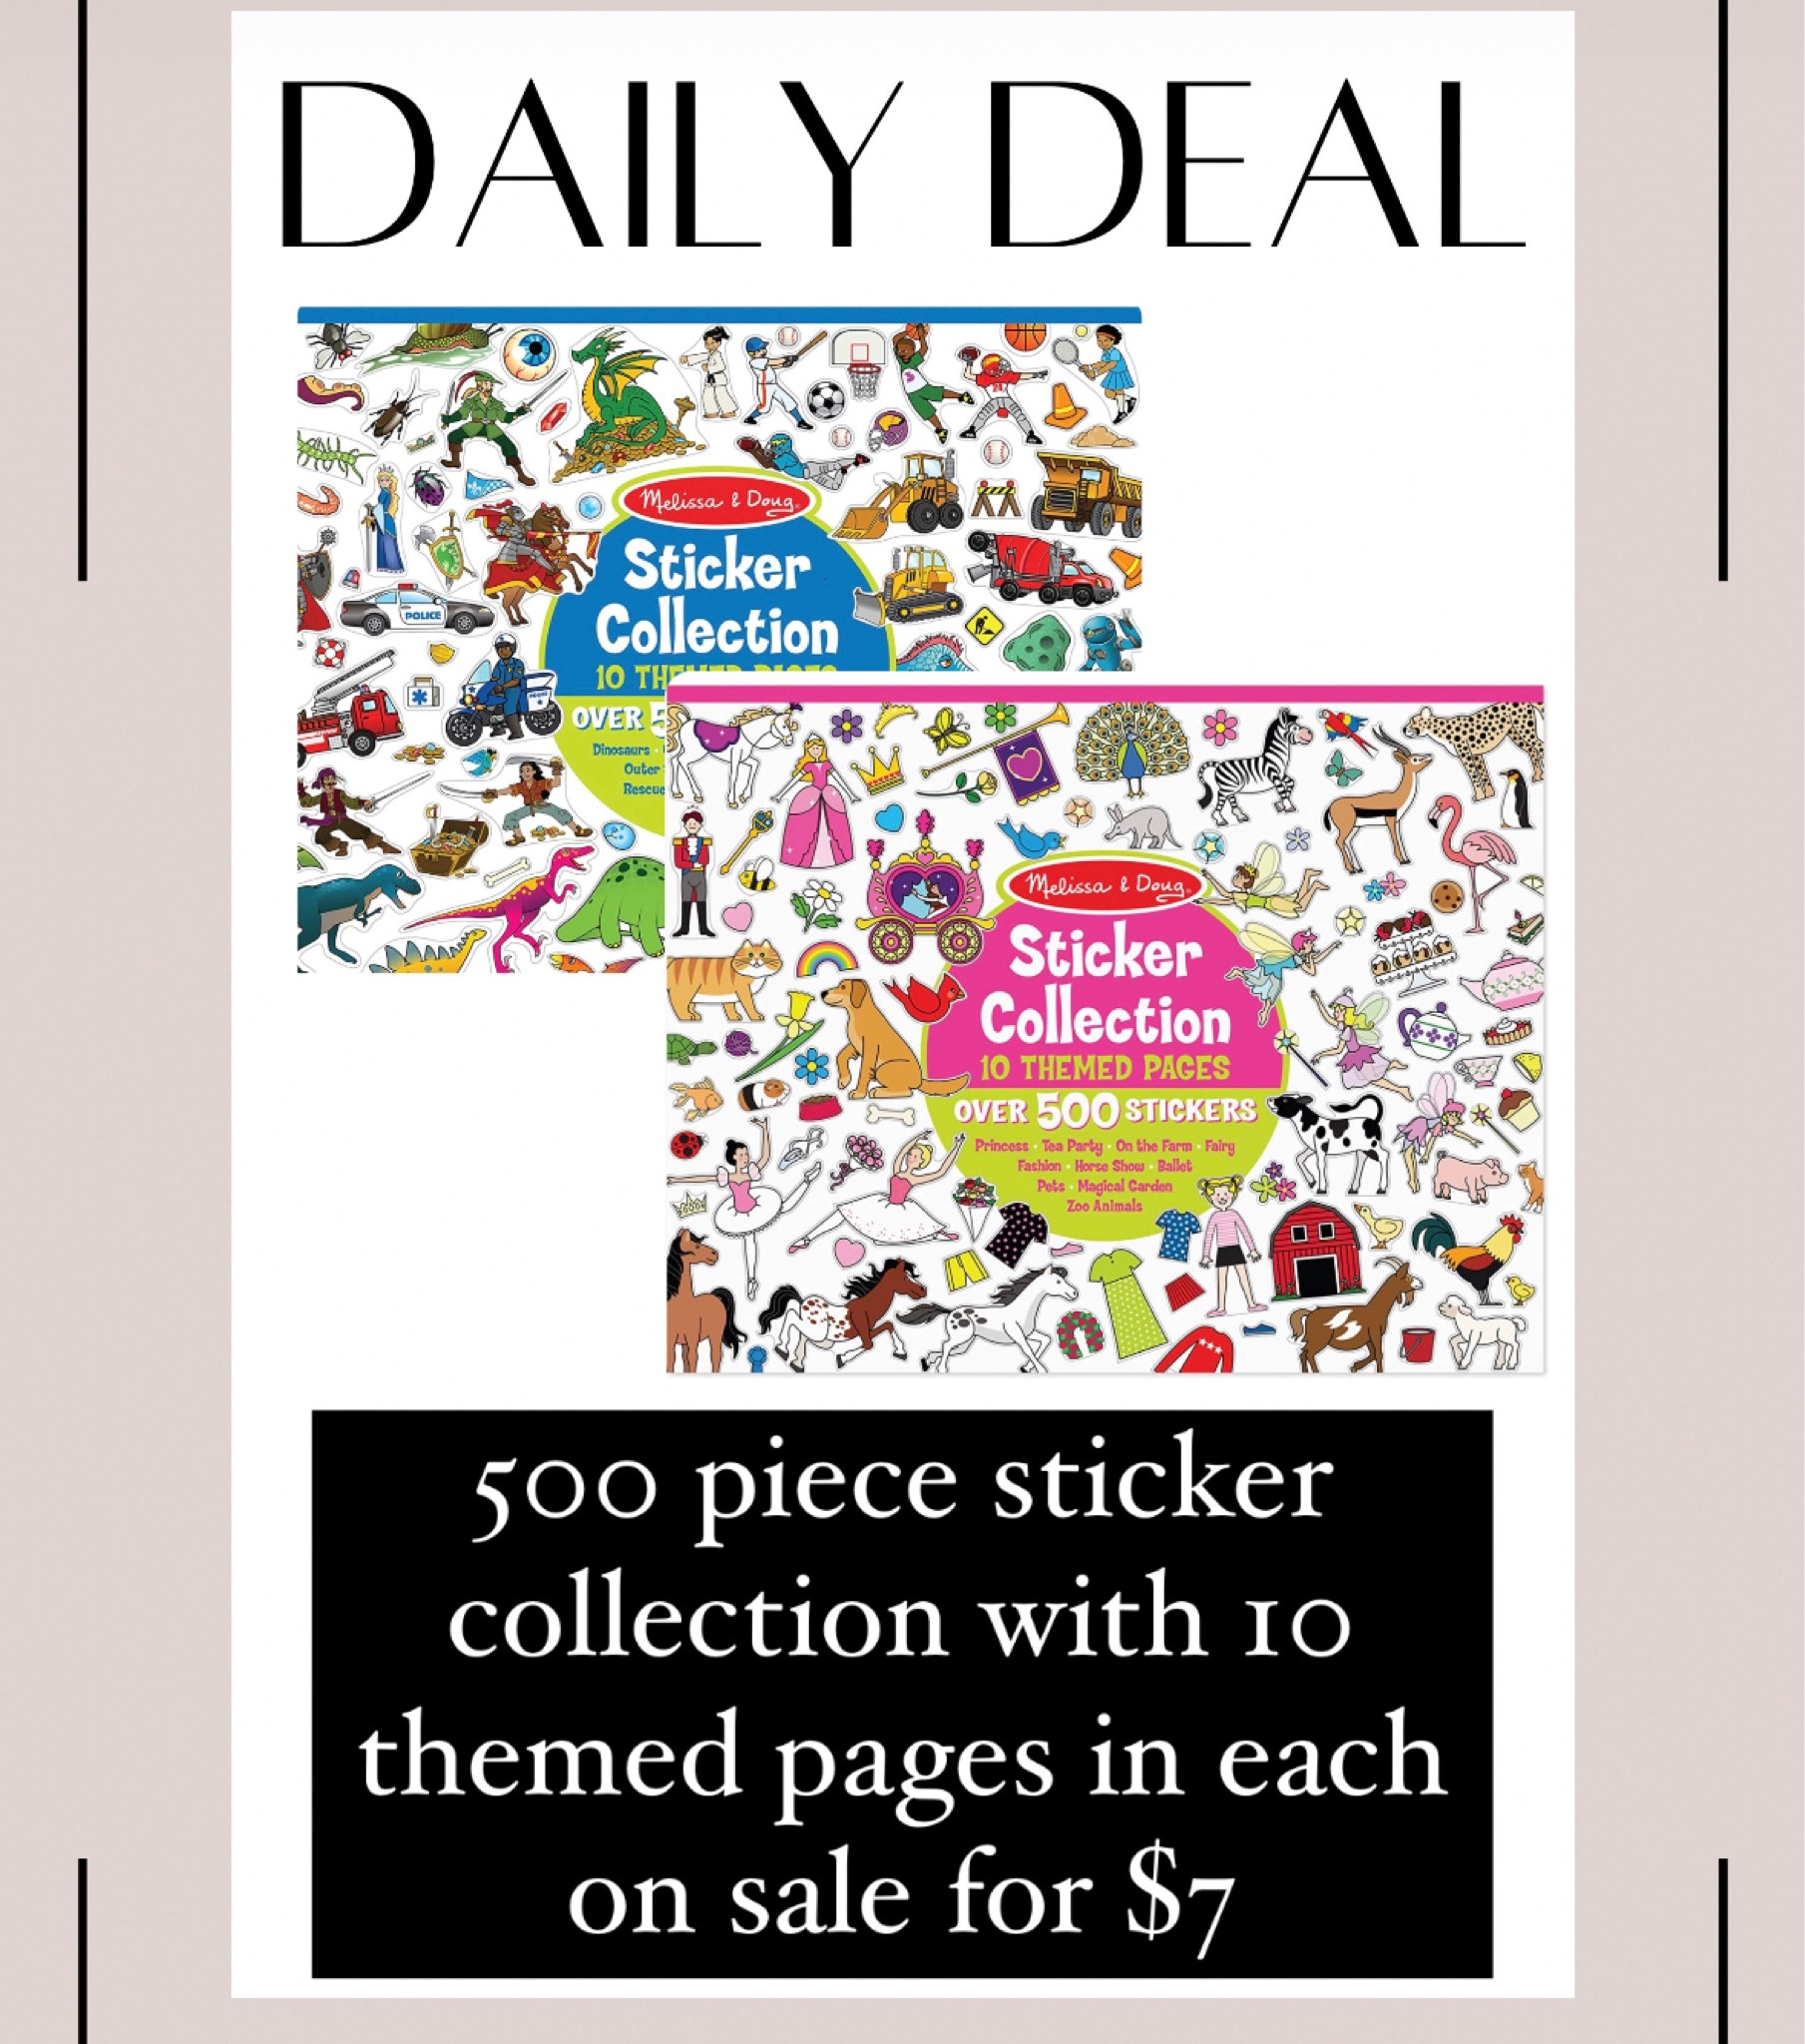 Melissa & Doug Sticker WOW!™ … curated on LTK